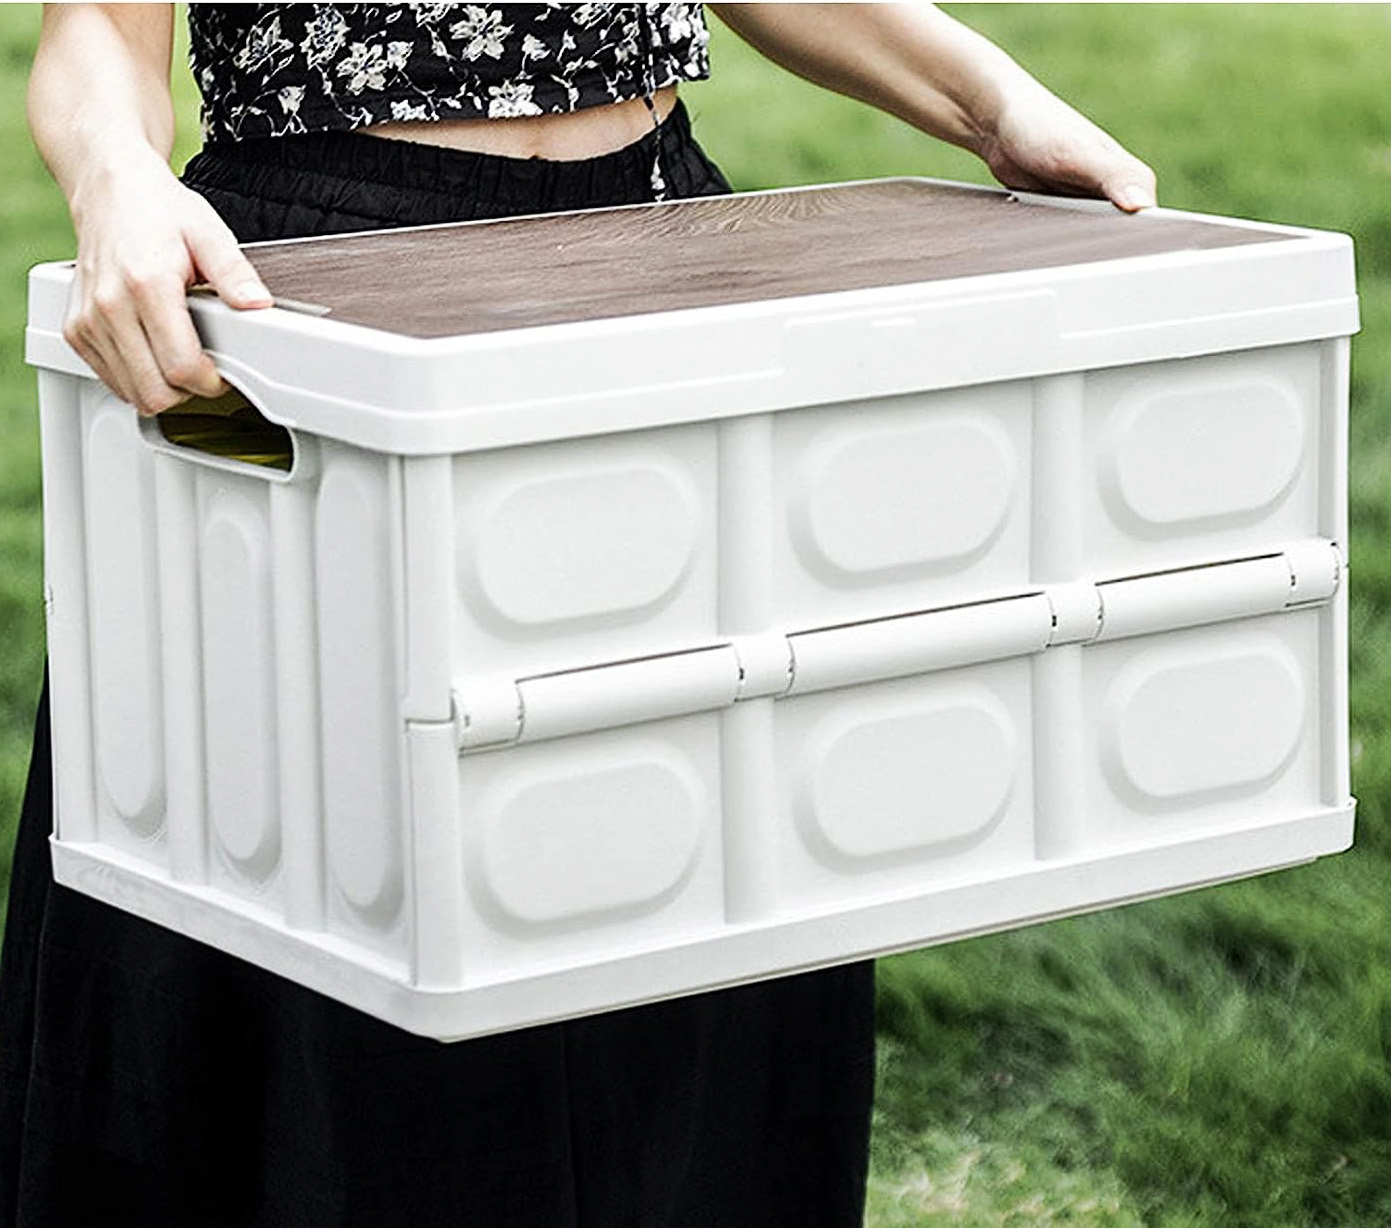 Large Portable Folding Outdoor Storage Box Garden Deck Container Organiser (56L, White & Wood)